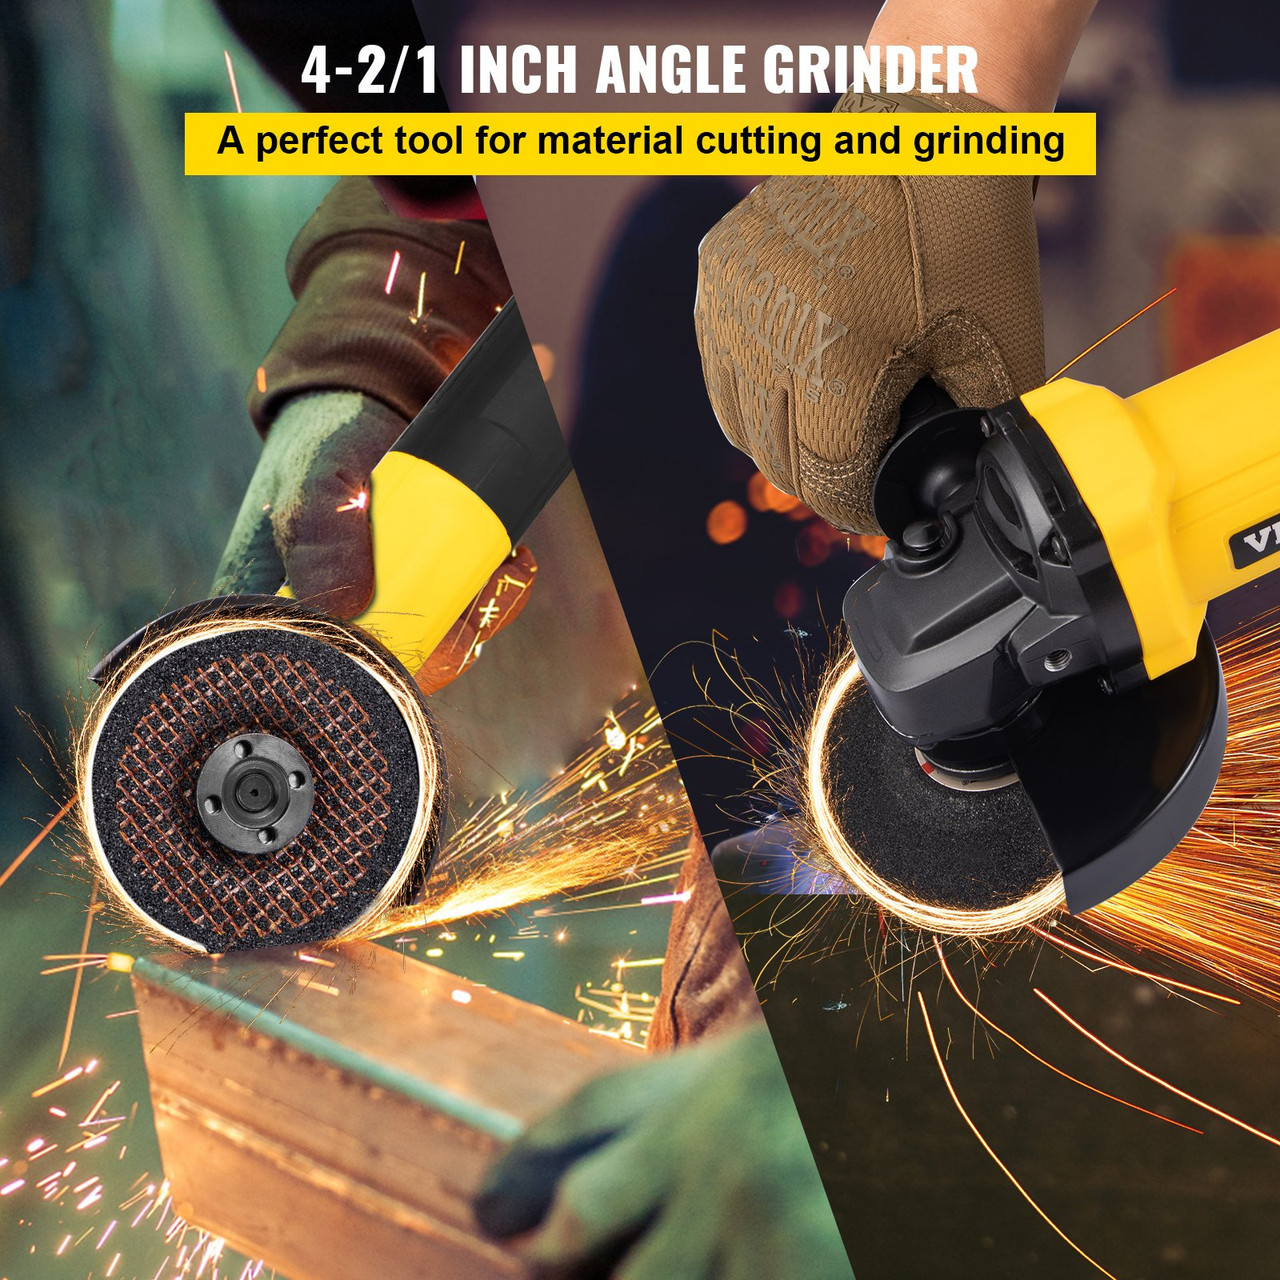 Shall Angle Grinder Tool 7.5Amp 4-1/2 inch, 6-Variable-Speed Grinders Power Tools, Electric Metal Grinder 12000 RPM w/ 2 Safety Guards, Cutting